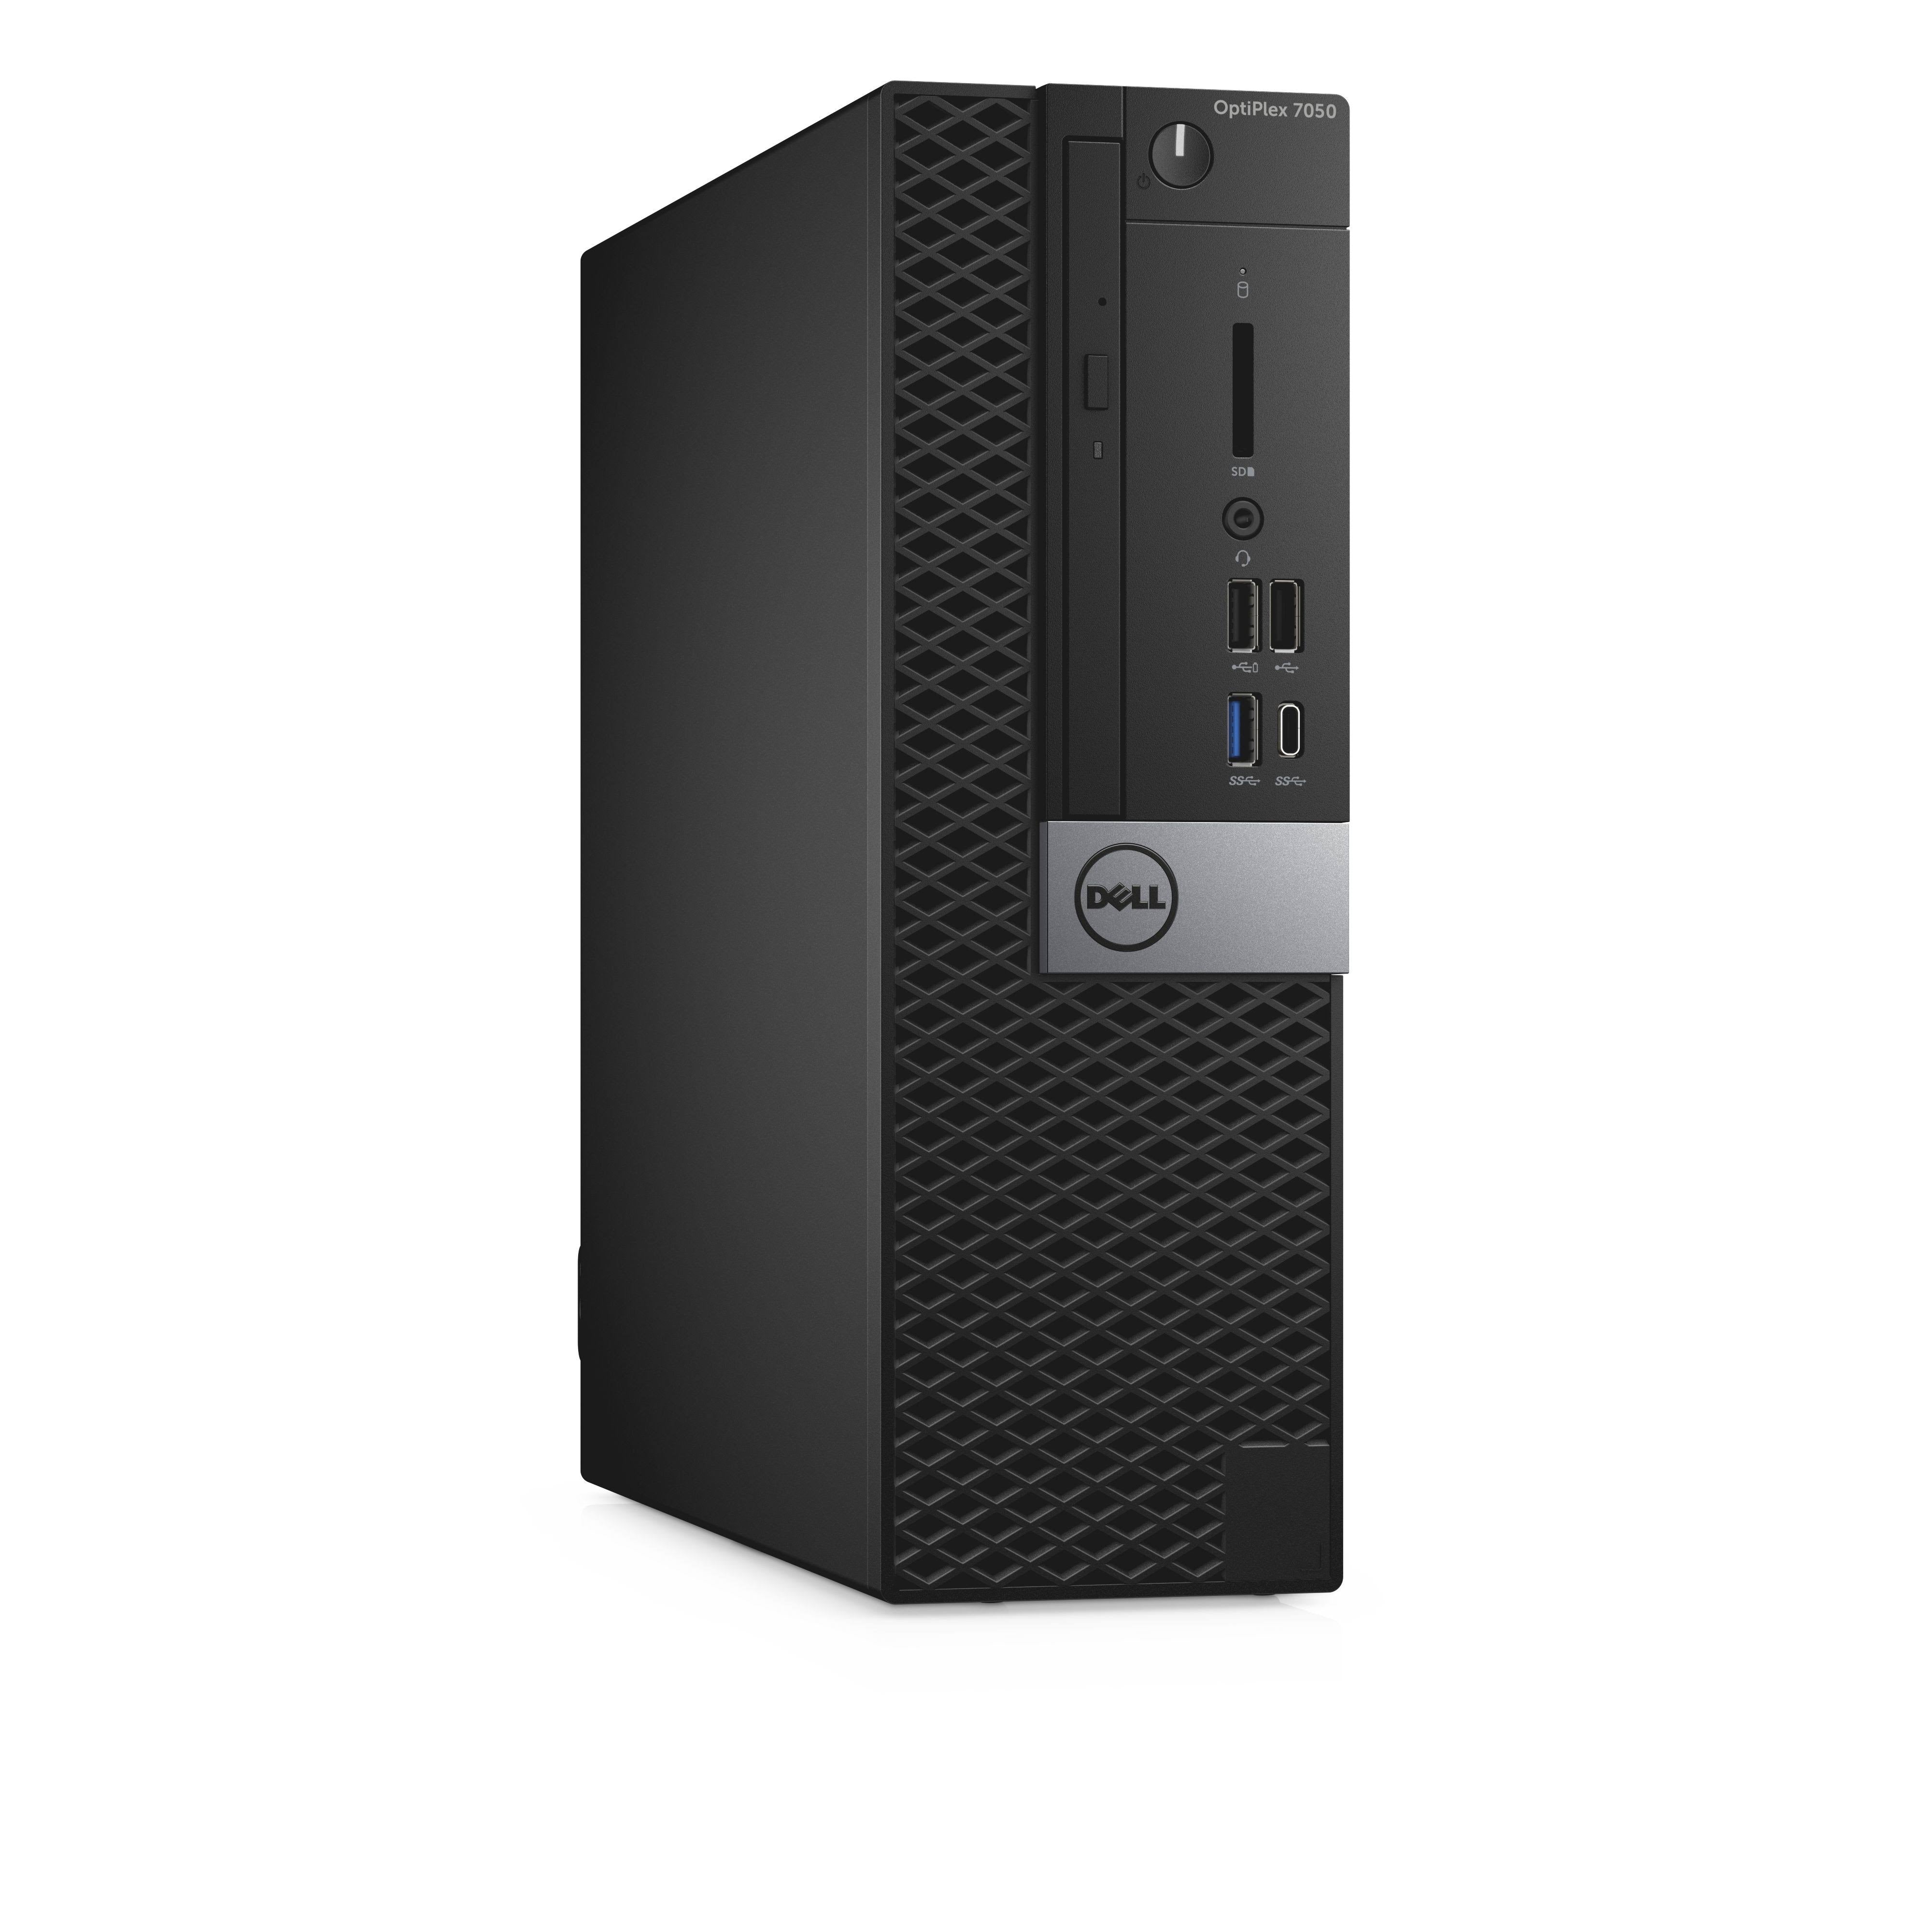 Dell Optiplex 7050 SFF i7-7700 3.60GHz | 16GB RAM | 512GB NVMe Hard Drive | WIFI | Wired Mouse and Keyboard | Windows 11 Pro